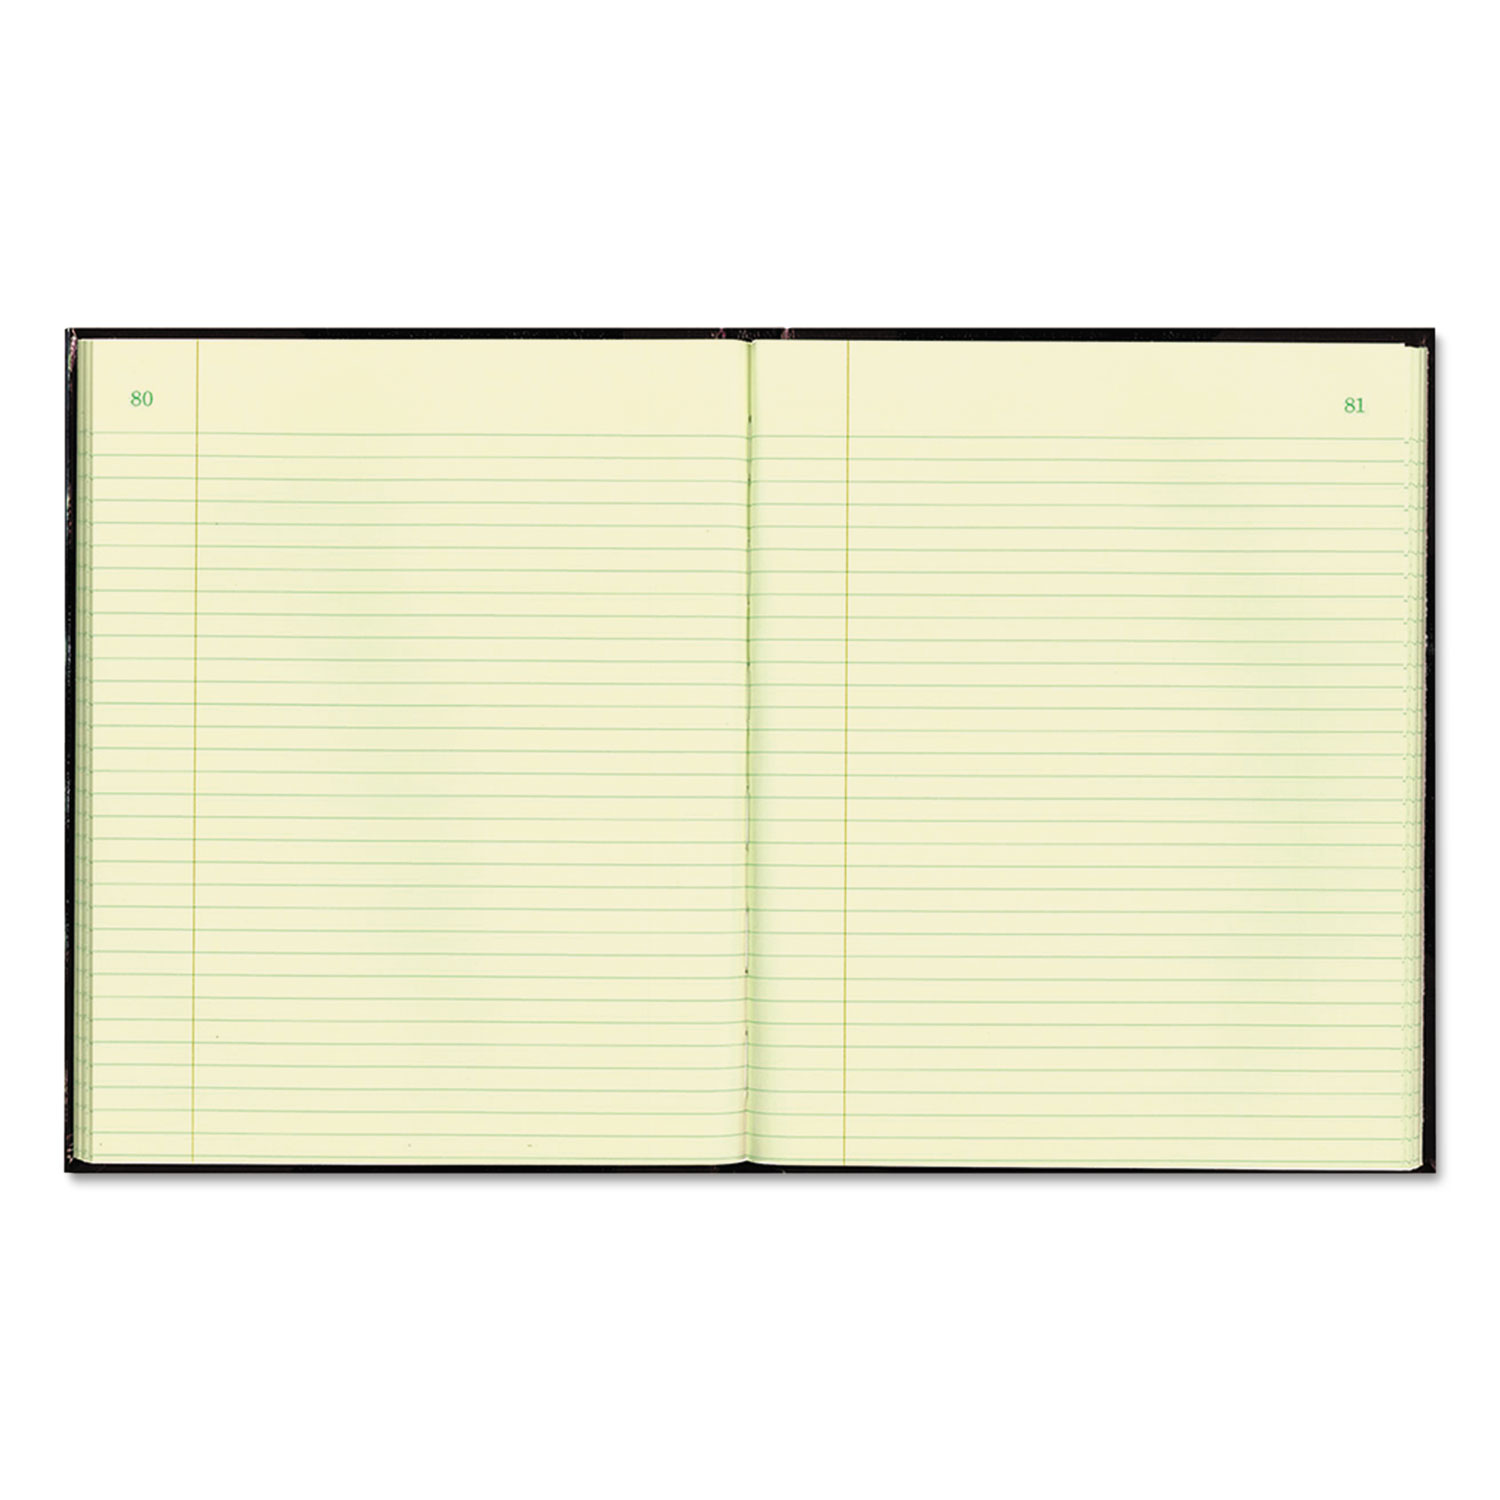 Texthide Record Book, Black/Burgundy, 300 Green Pages, 10 3/8 x 8 3/8